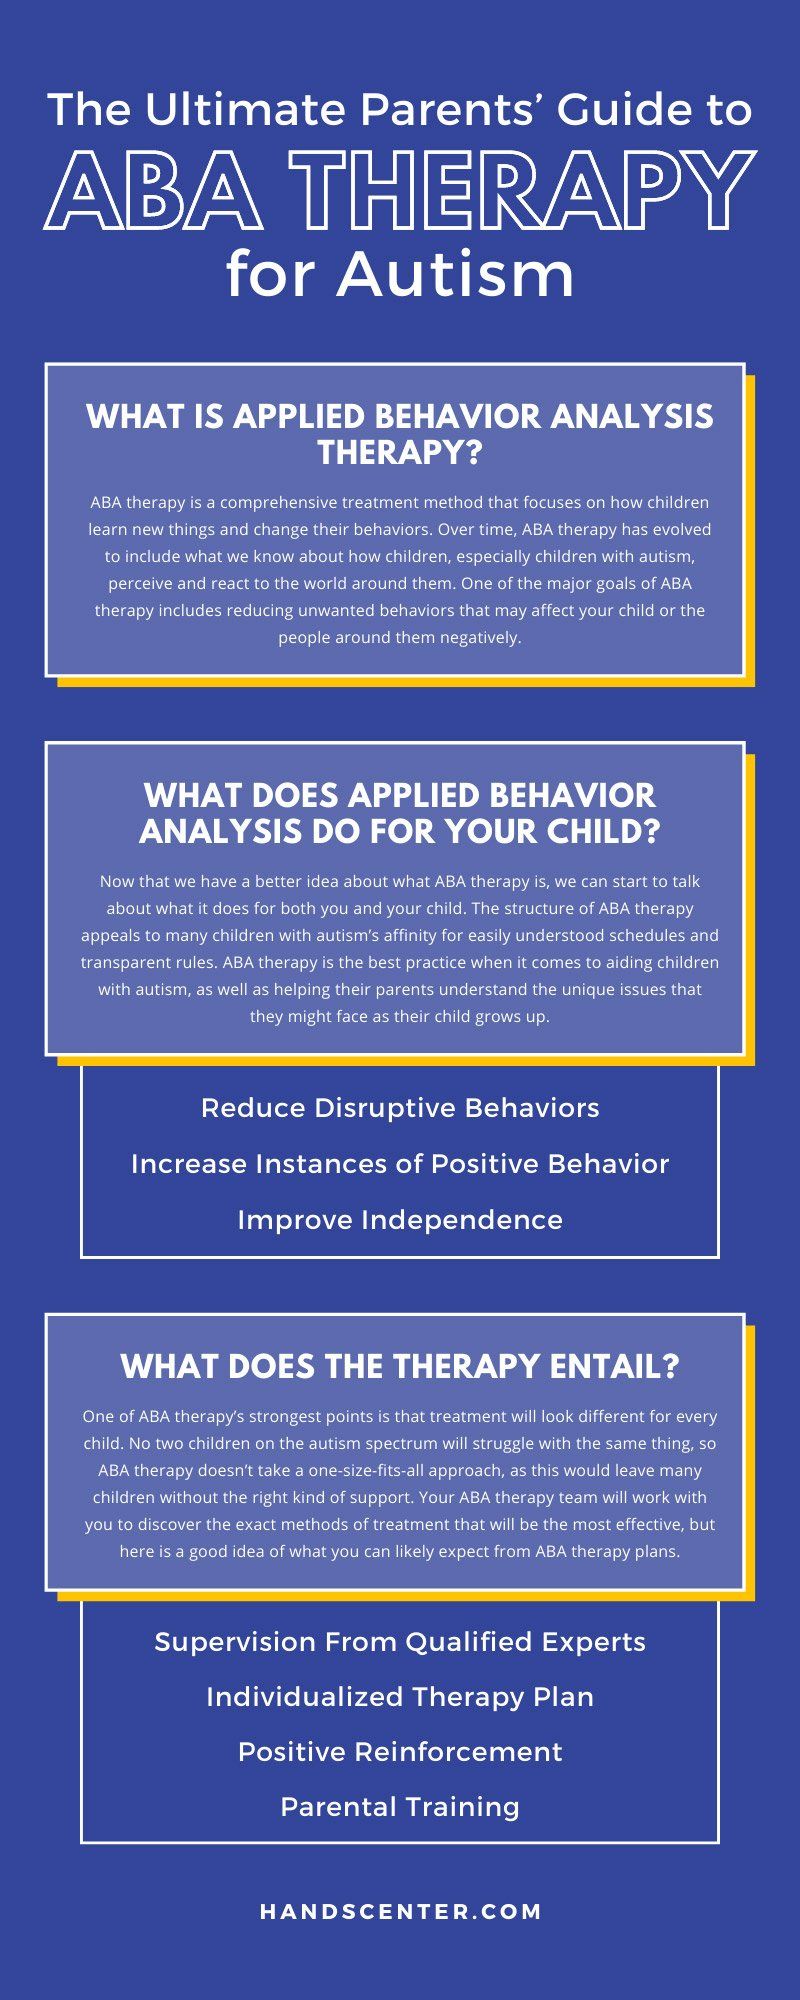 The Ultimate Parents’ Guide to ABA Therapy for Autism